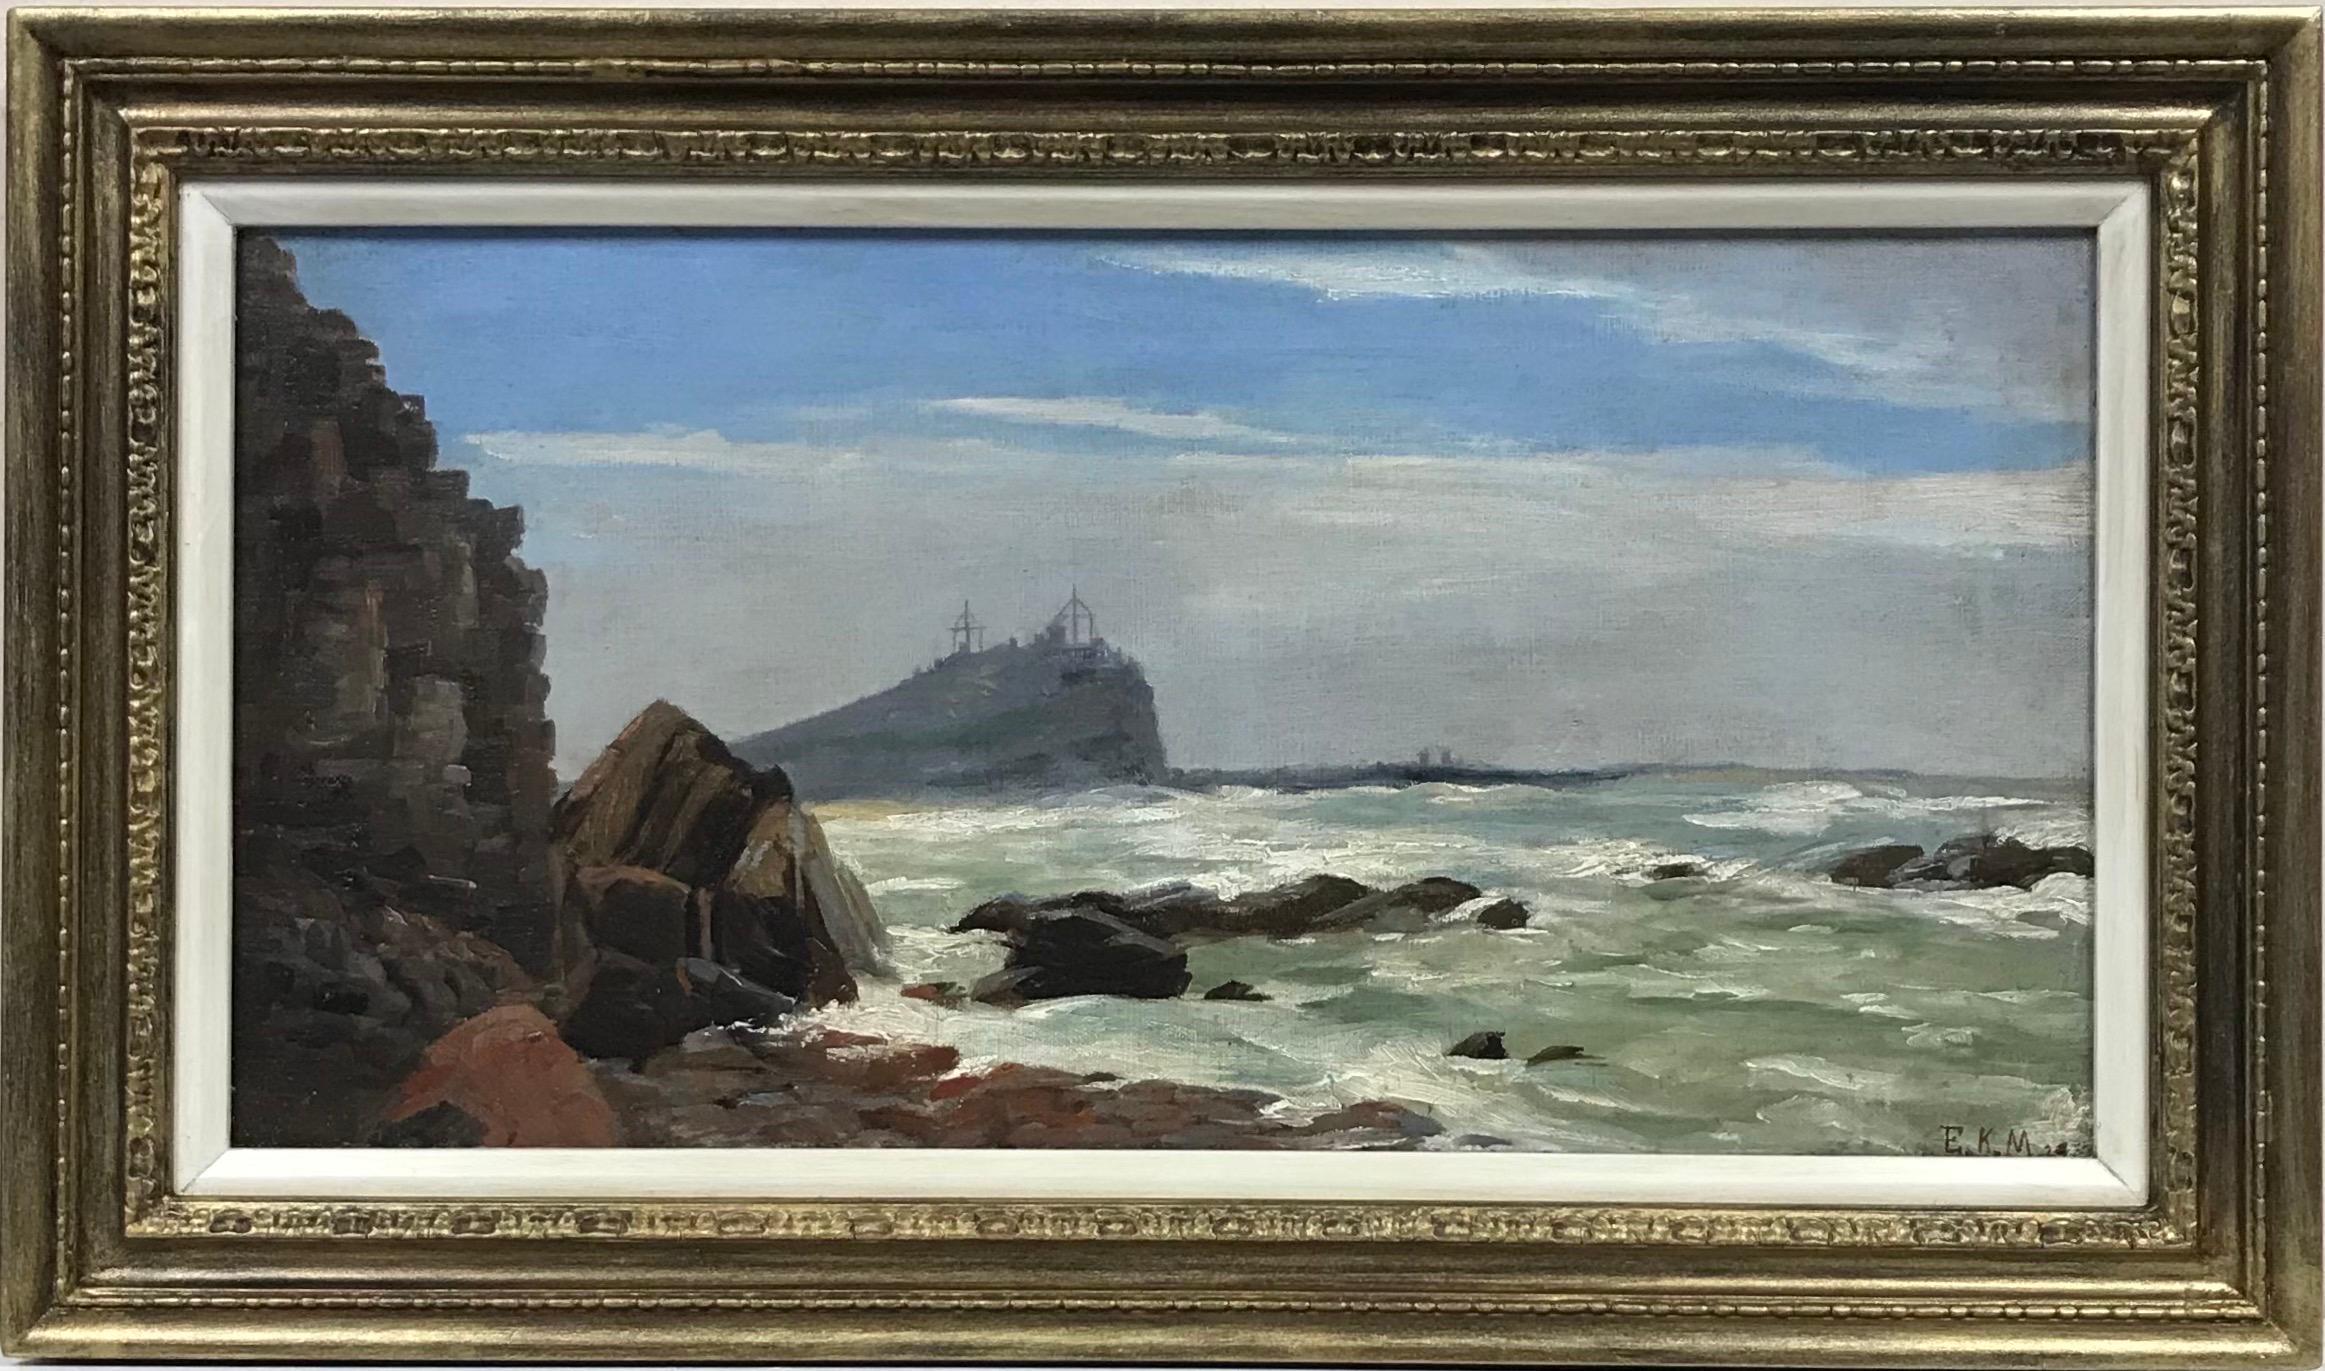 1920's Cornish Landscape Painting - Cornish Coastal Seascape with Tin Mines overlooking Cliffs, signed English Oil